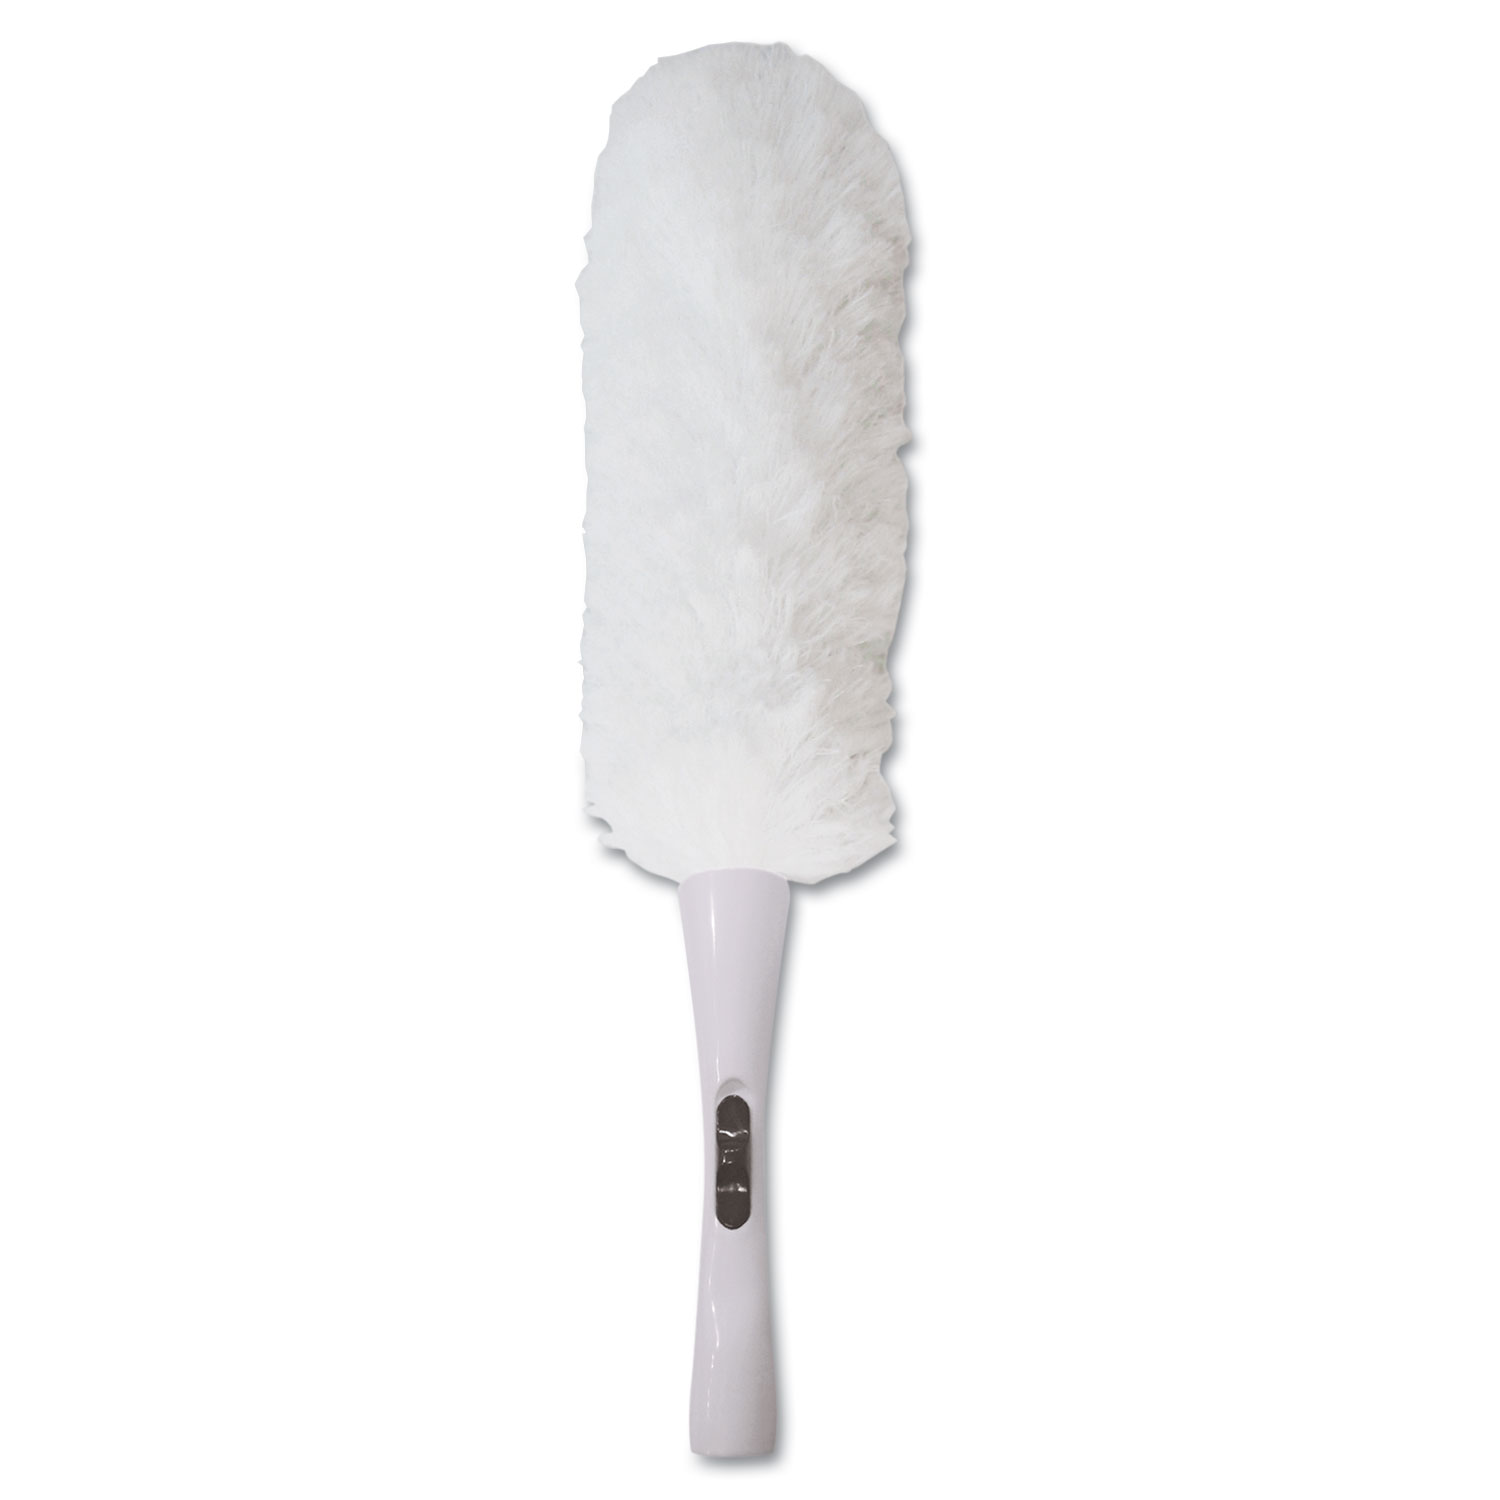 MicroFeather Duster Microfiber Feathers - Washable, 23